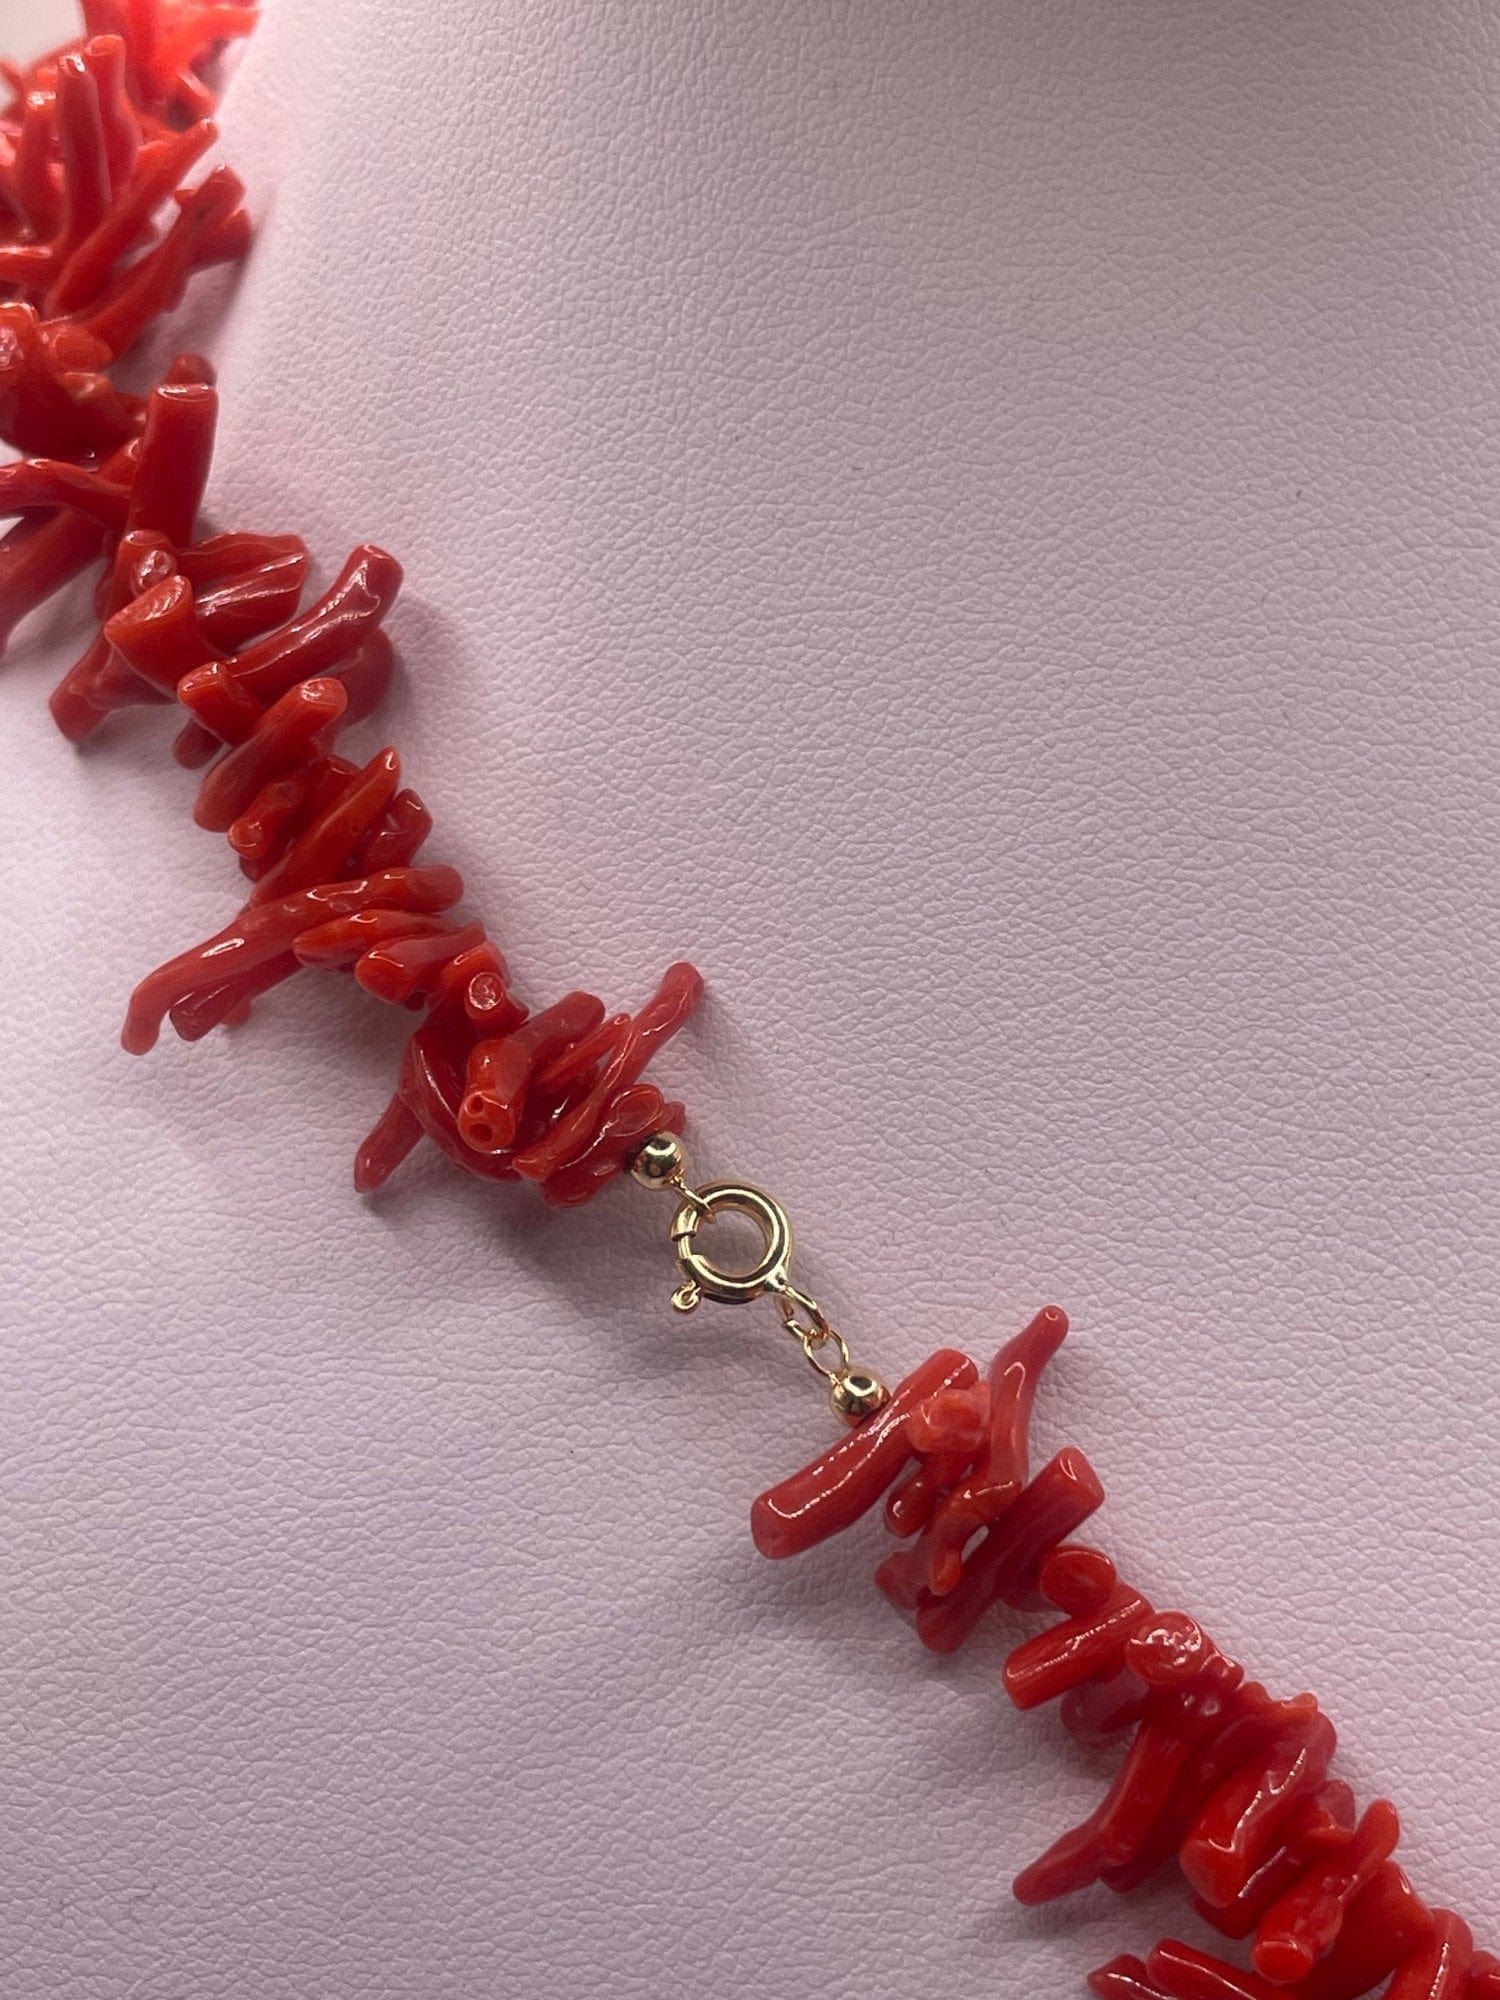 Planters Exchange Necklace Red Coral Branch Necklace